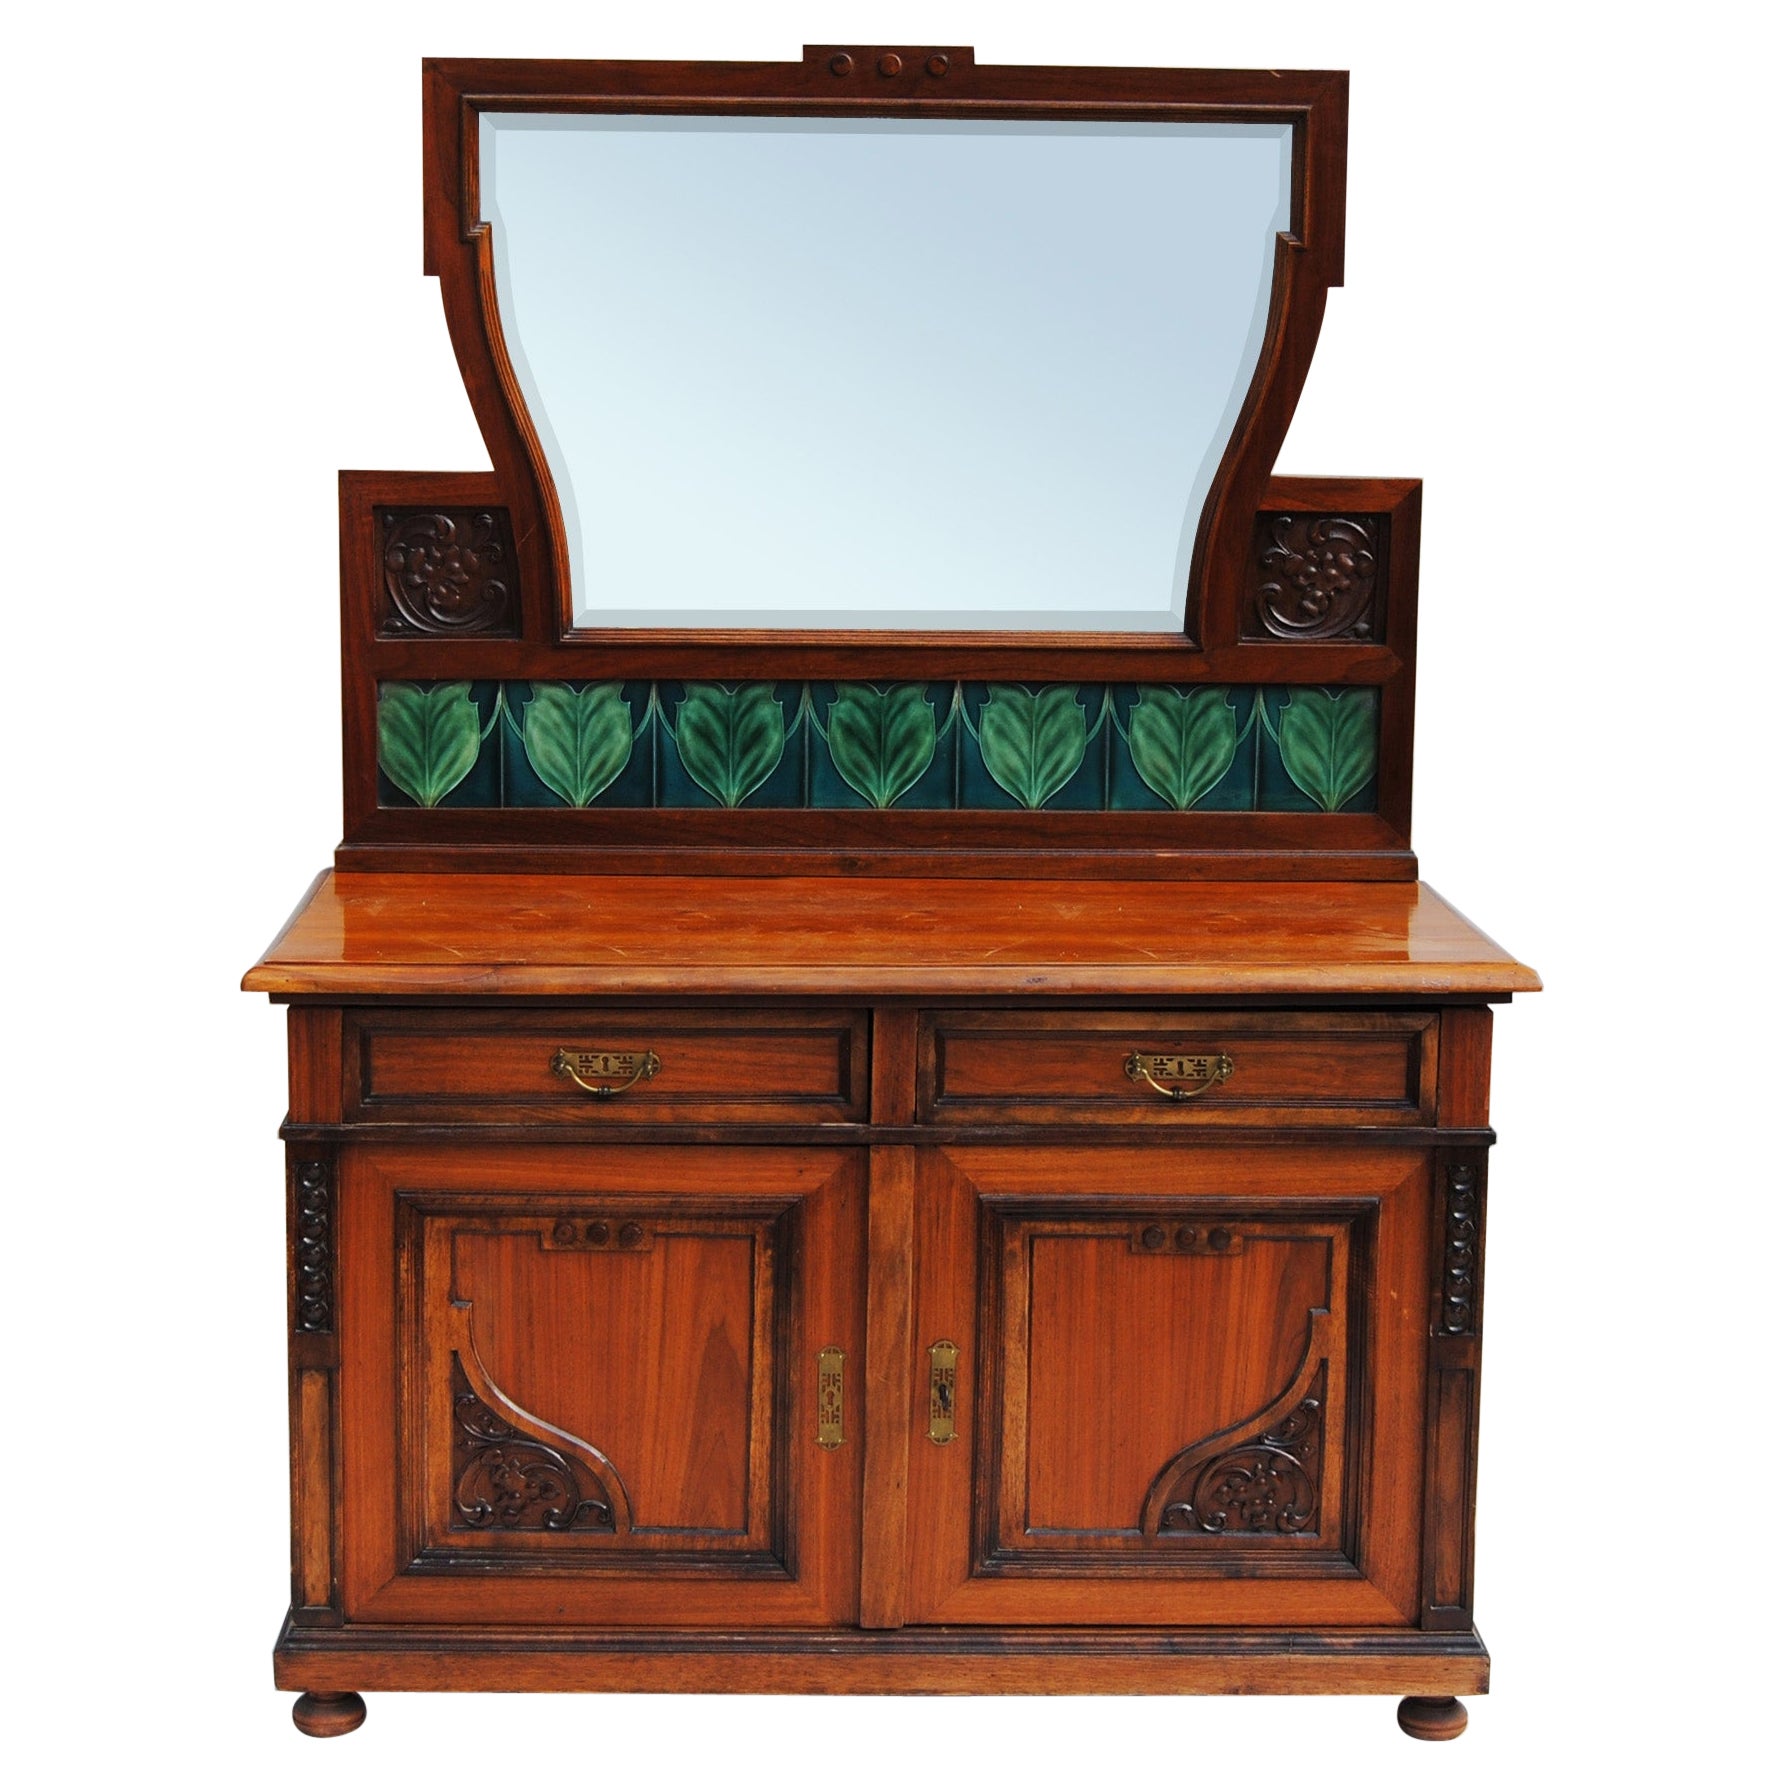 Czech Art Nouveau Dressing Table with Mirror, Walnut, Restored, 1910s For Sale